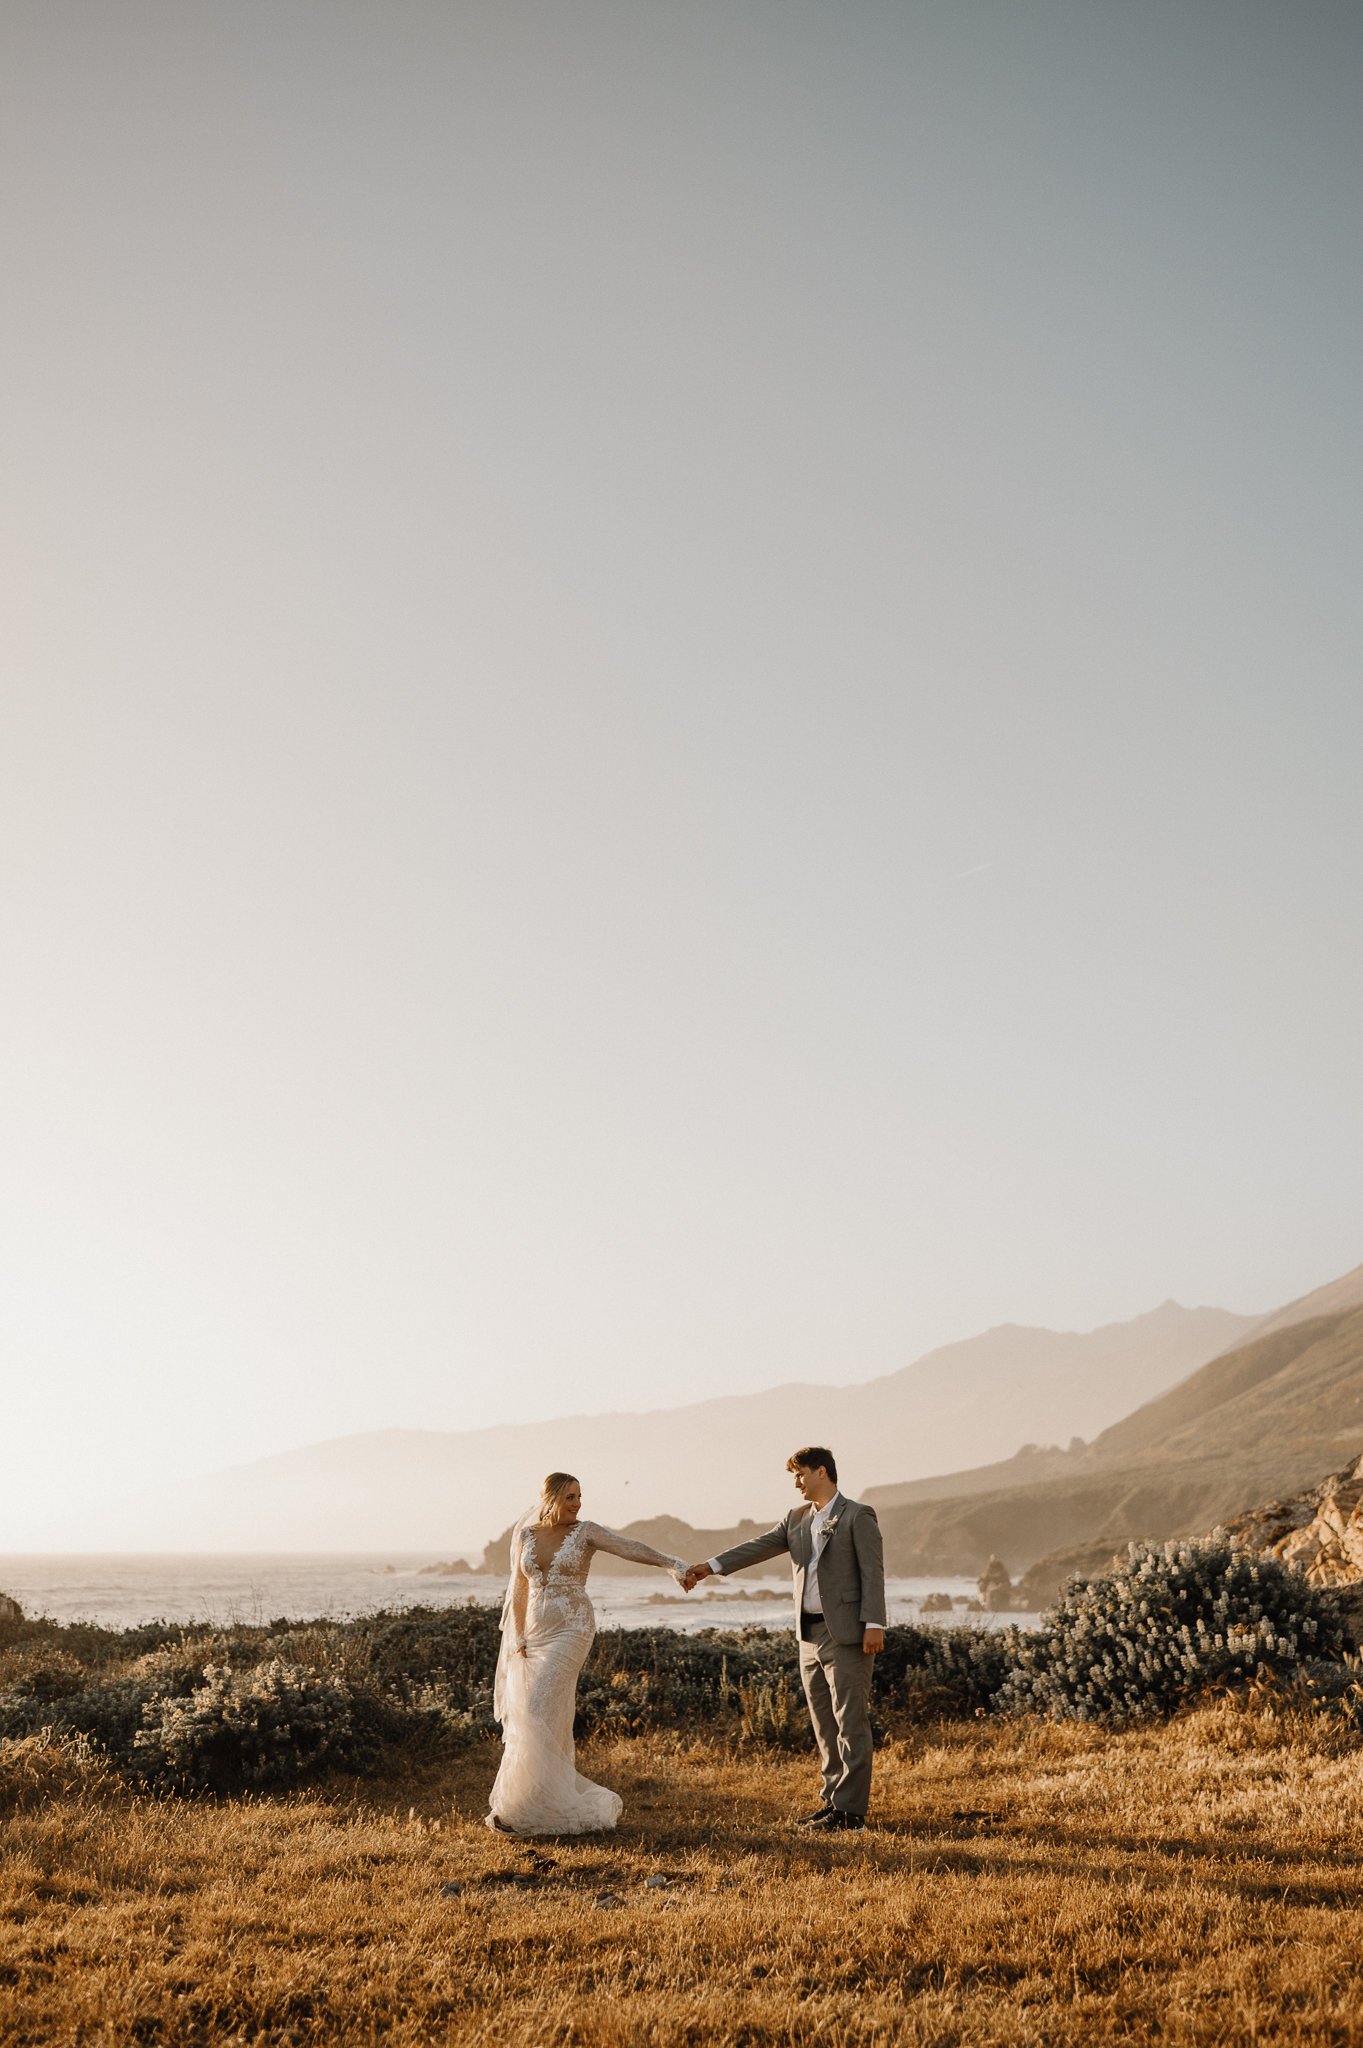 Big Sur Ventana wedding bride and groom walking in tall grass holding hands